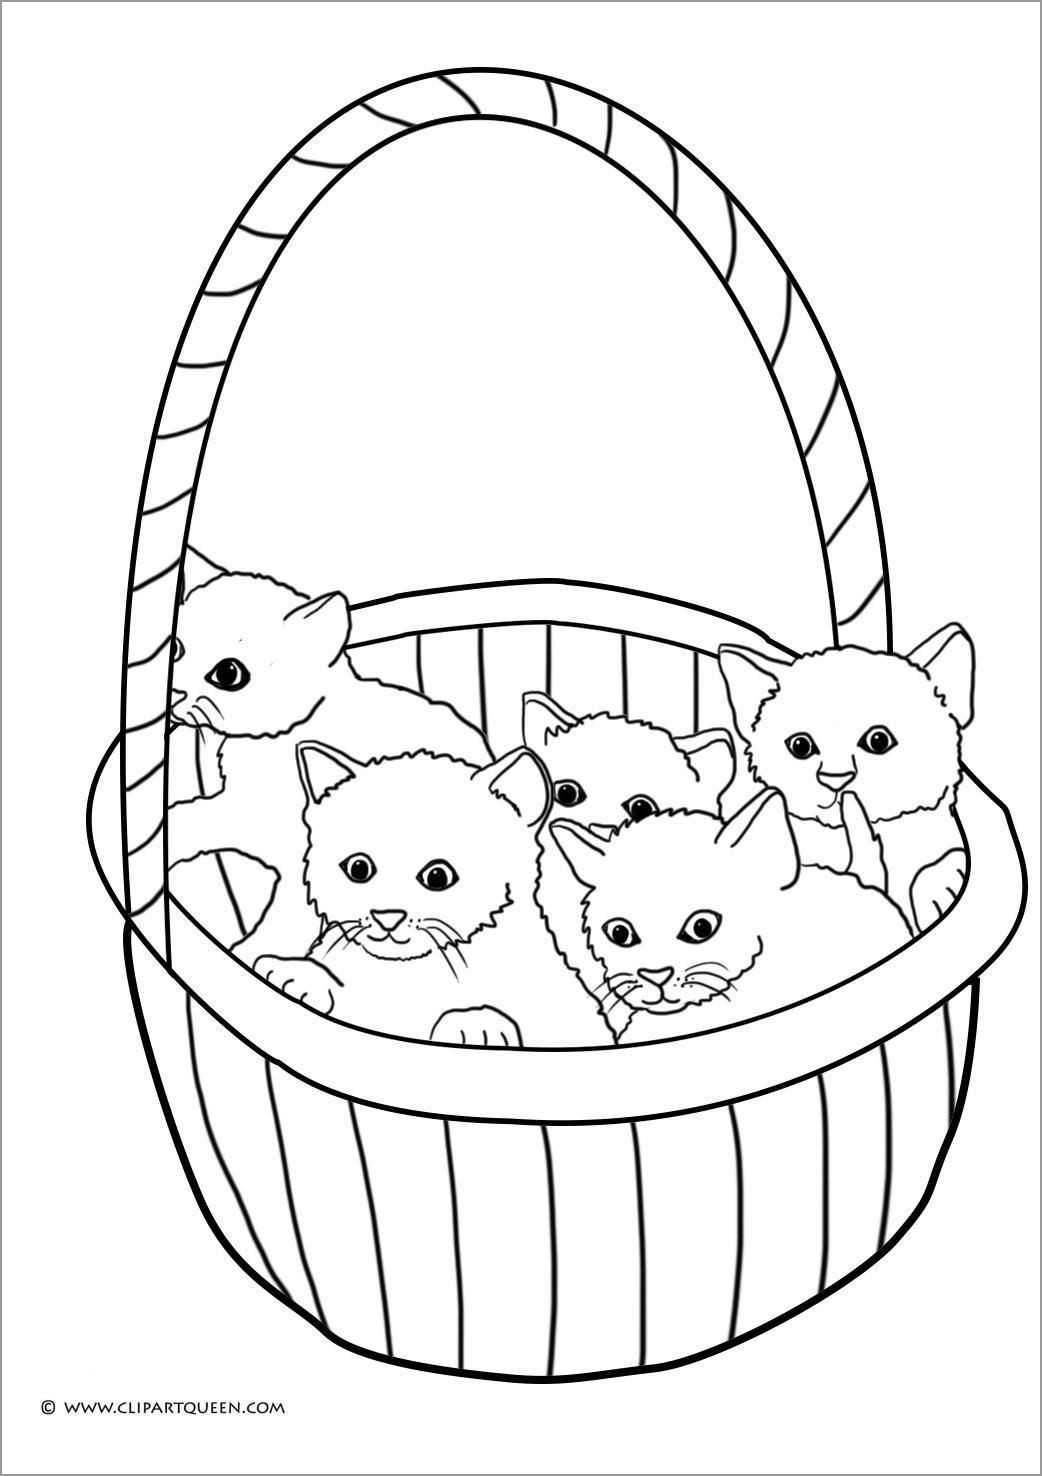 Kitten Coloring Pages for Preschoolers - ColoringBay